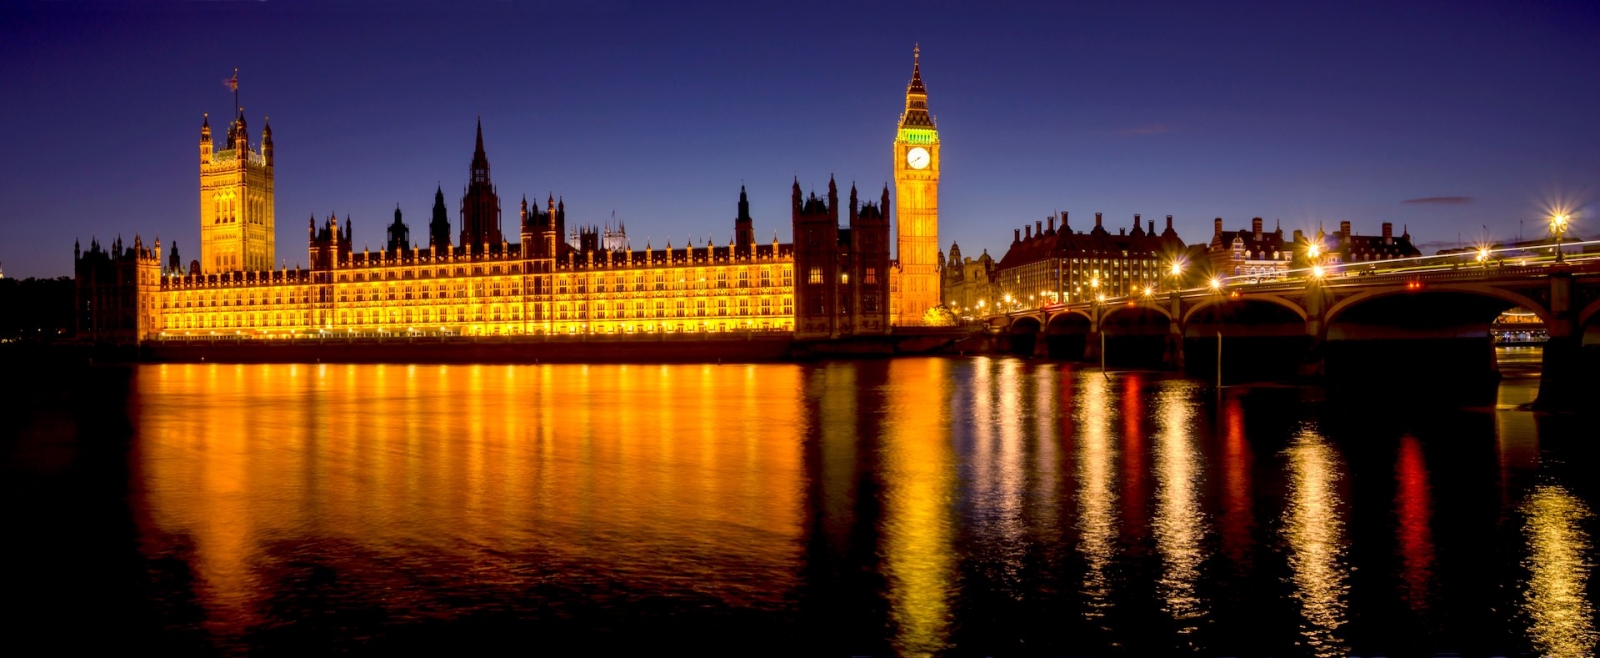 The Houses of Parliament in London, UK